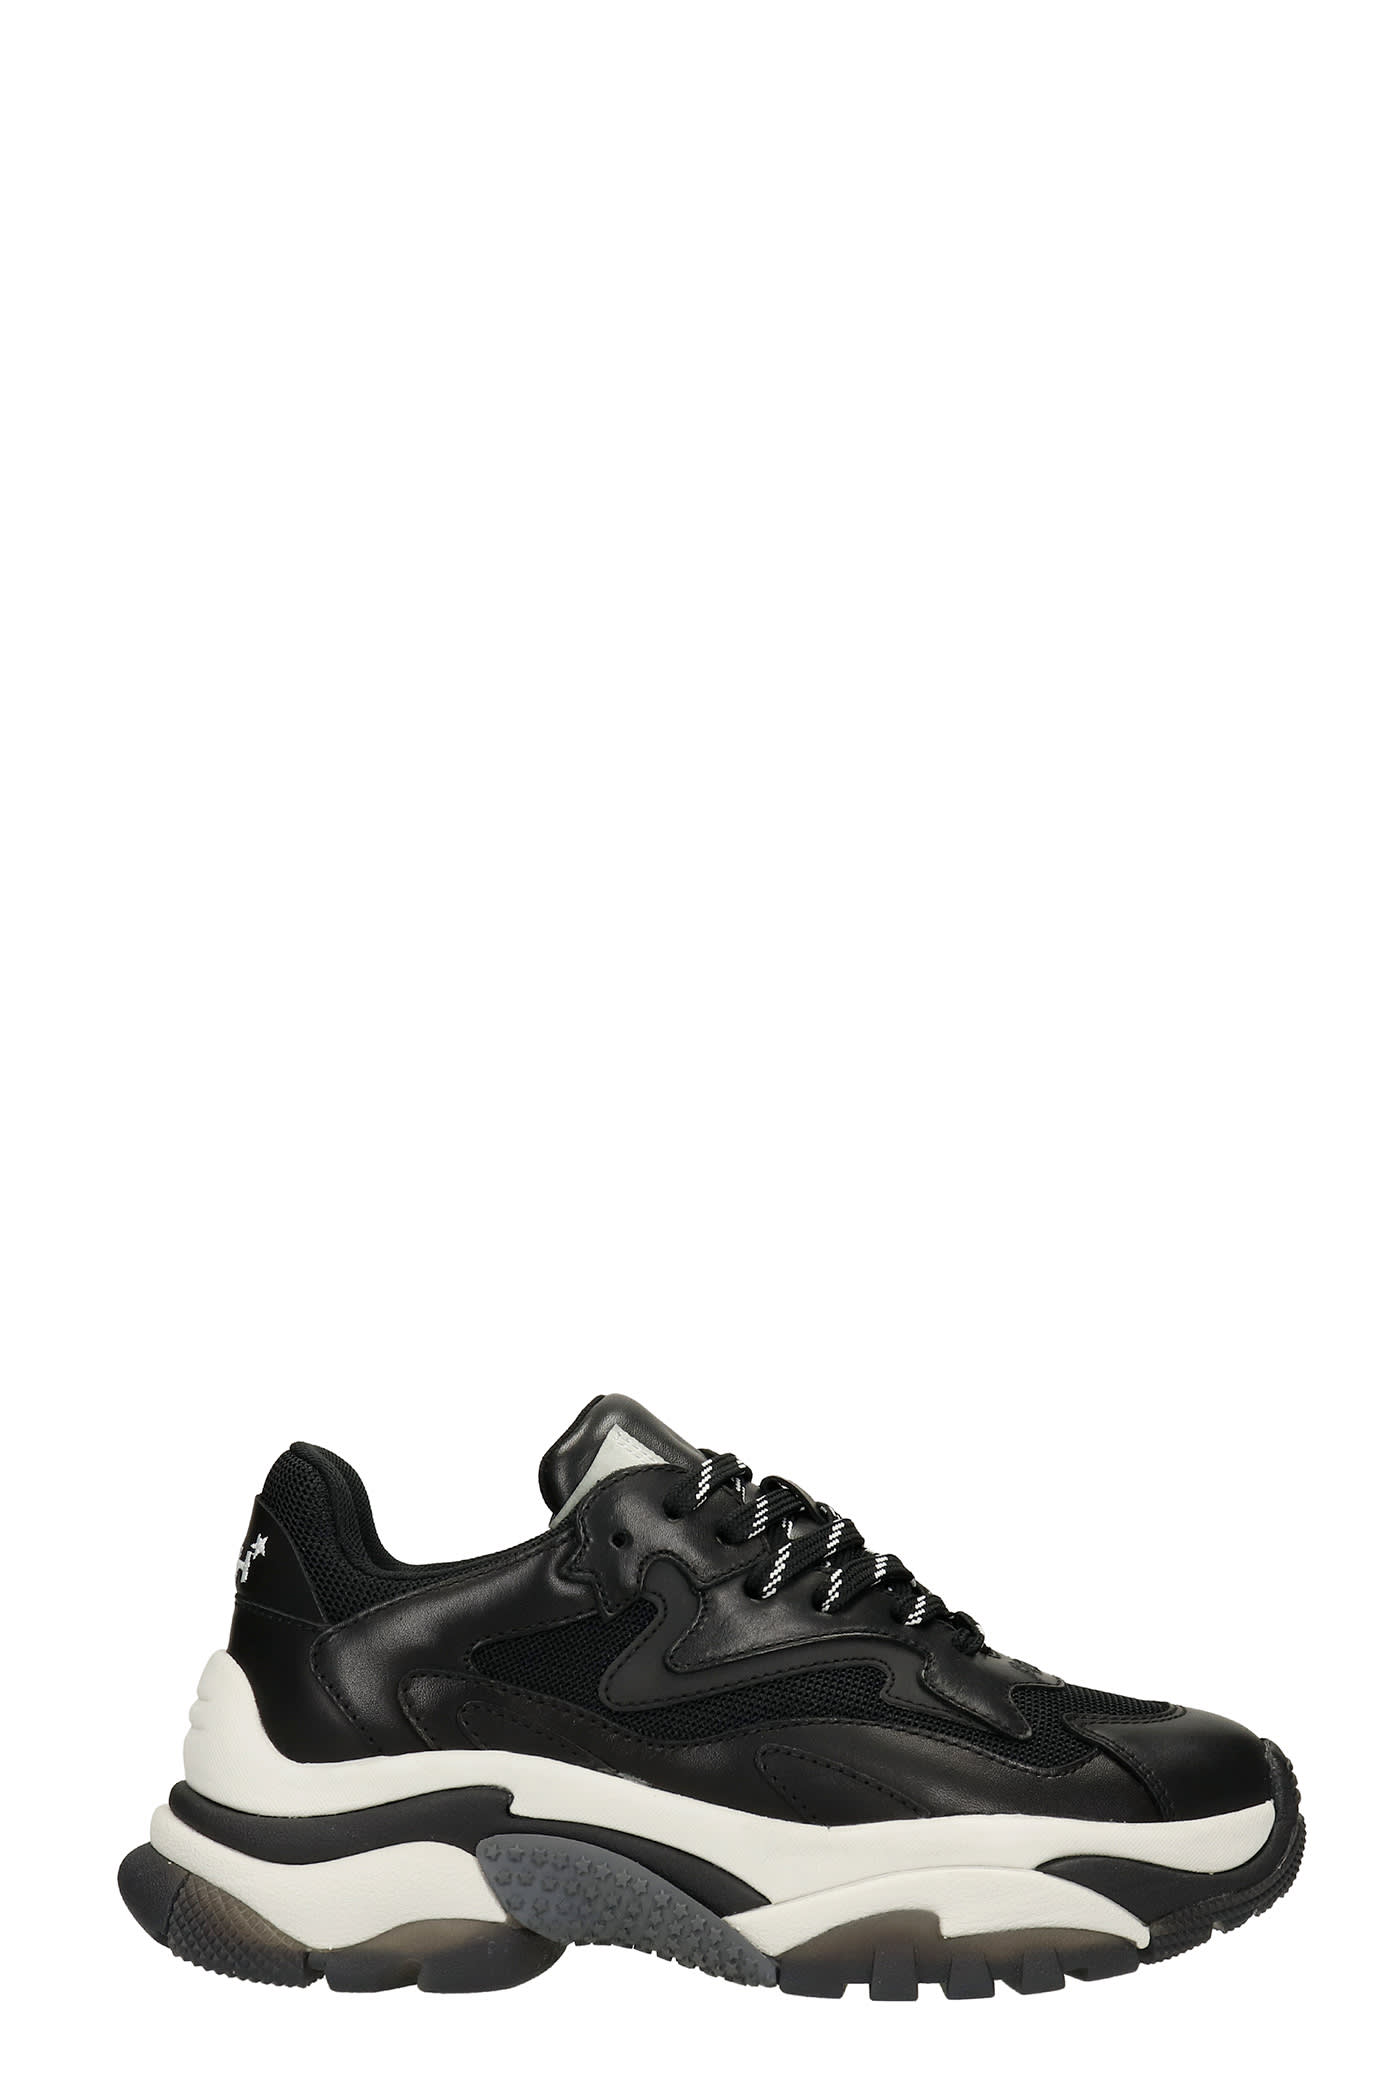 Ash Addict Sneakers In Black Leather